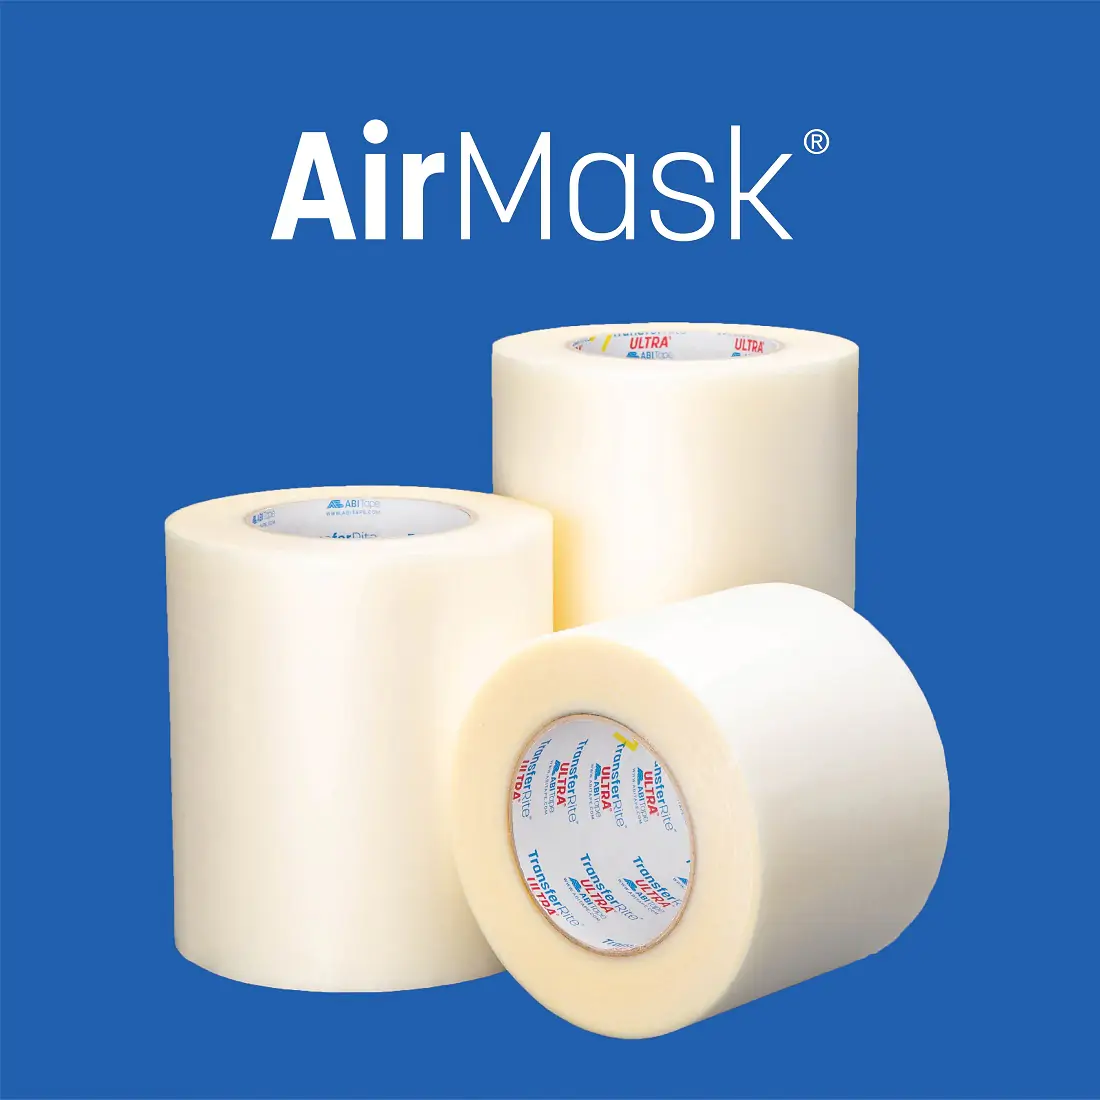 Three white AirMask application tape rolls of varying lengths on a blue background.